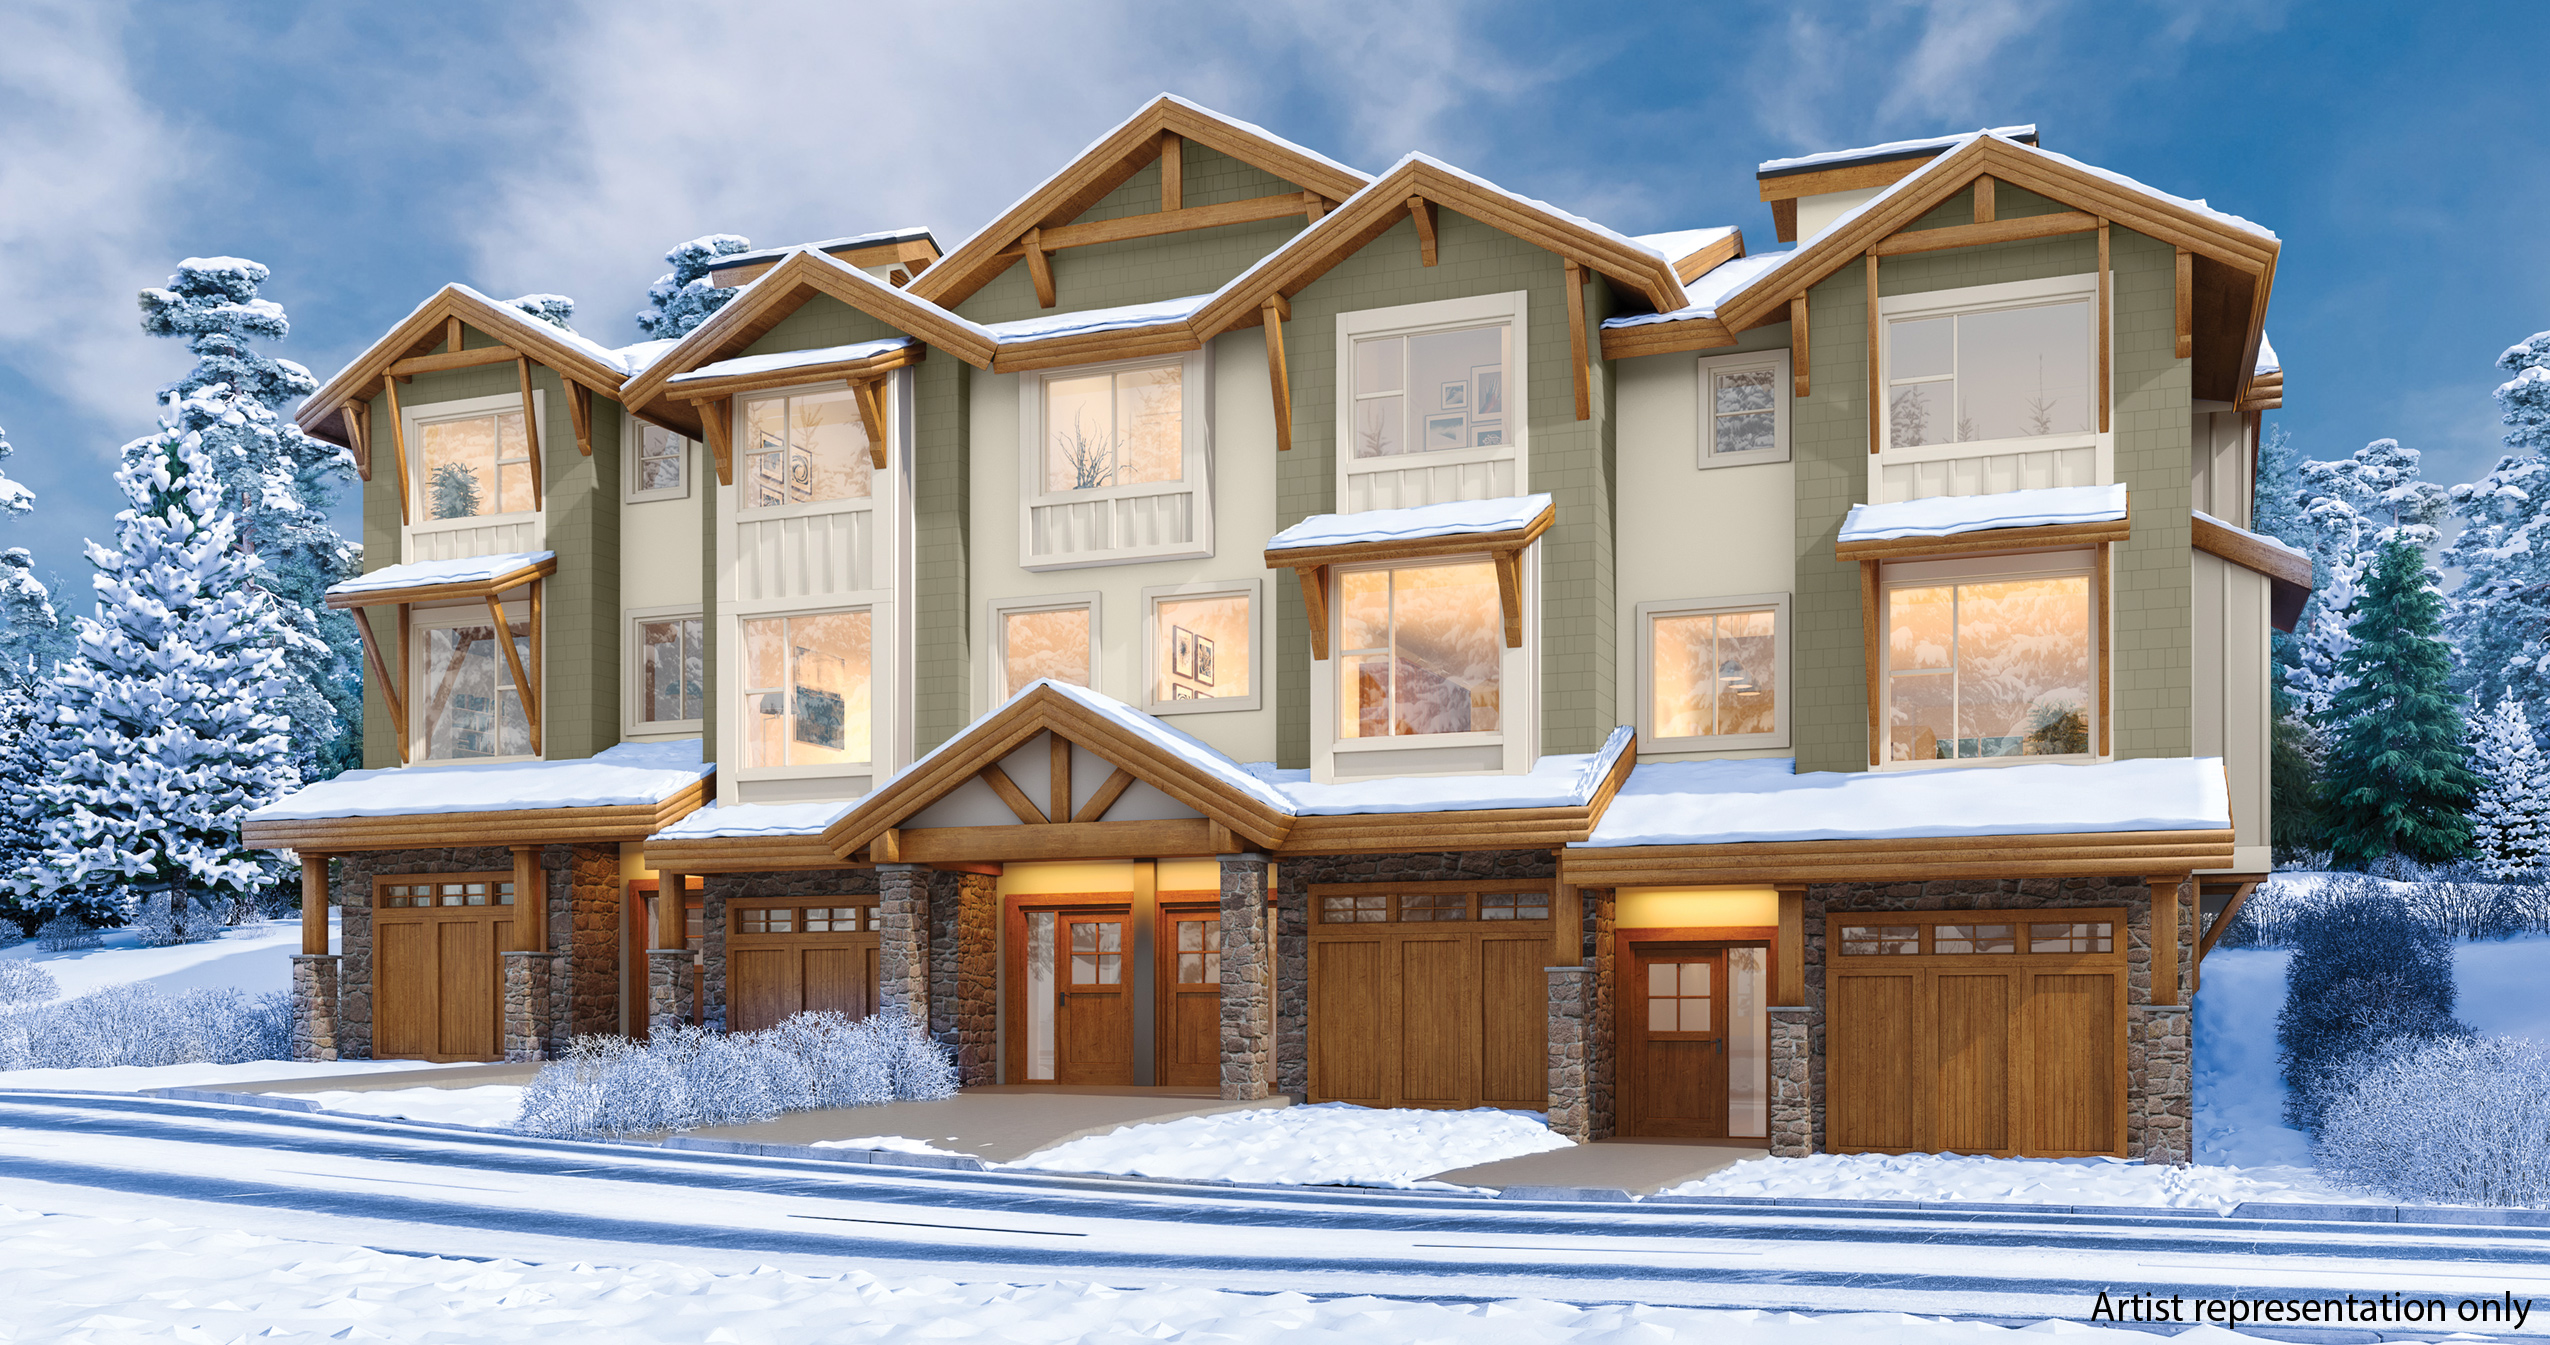 Altitude - Sun Peaks' newest real estate investment opportunity